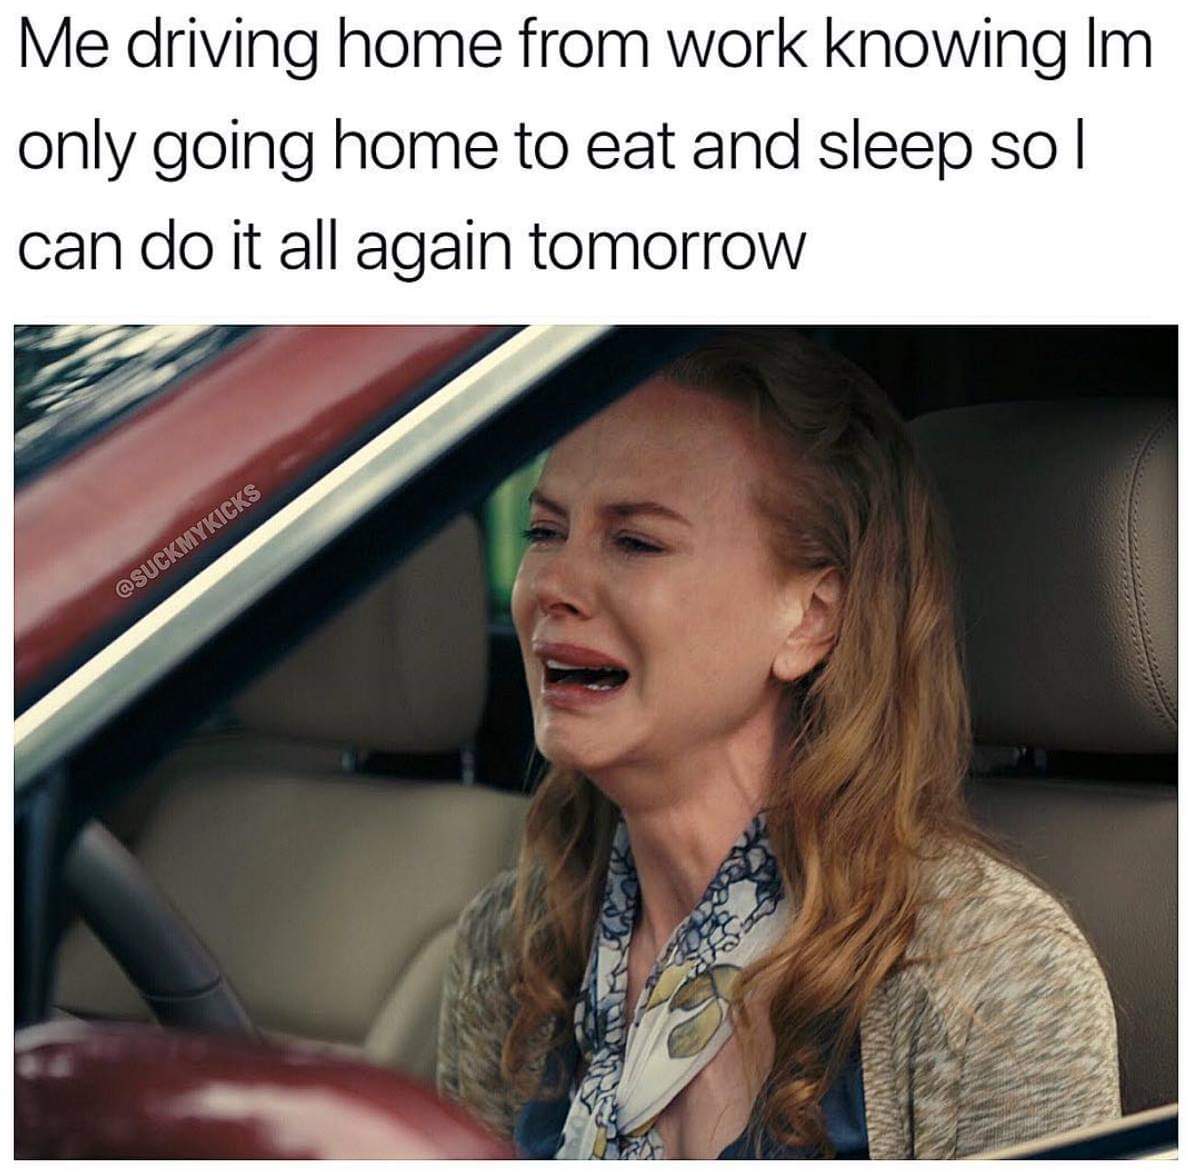 meme - work memes - Me driving home from work knowing Im only going home to eat and sleep so| can do it all again tomorrow